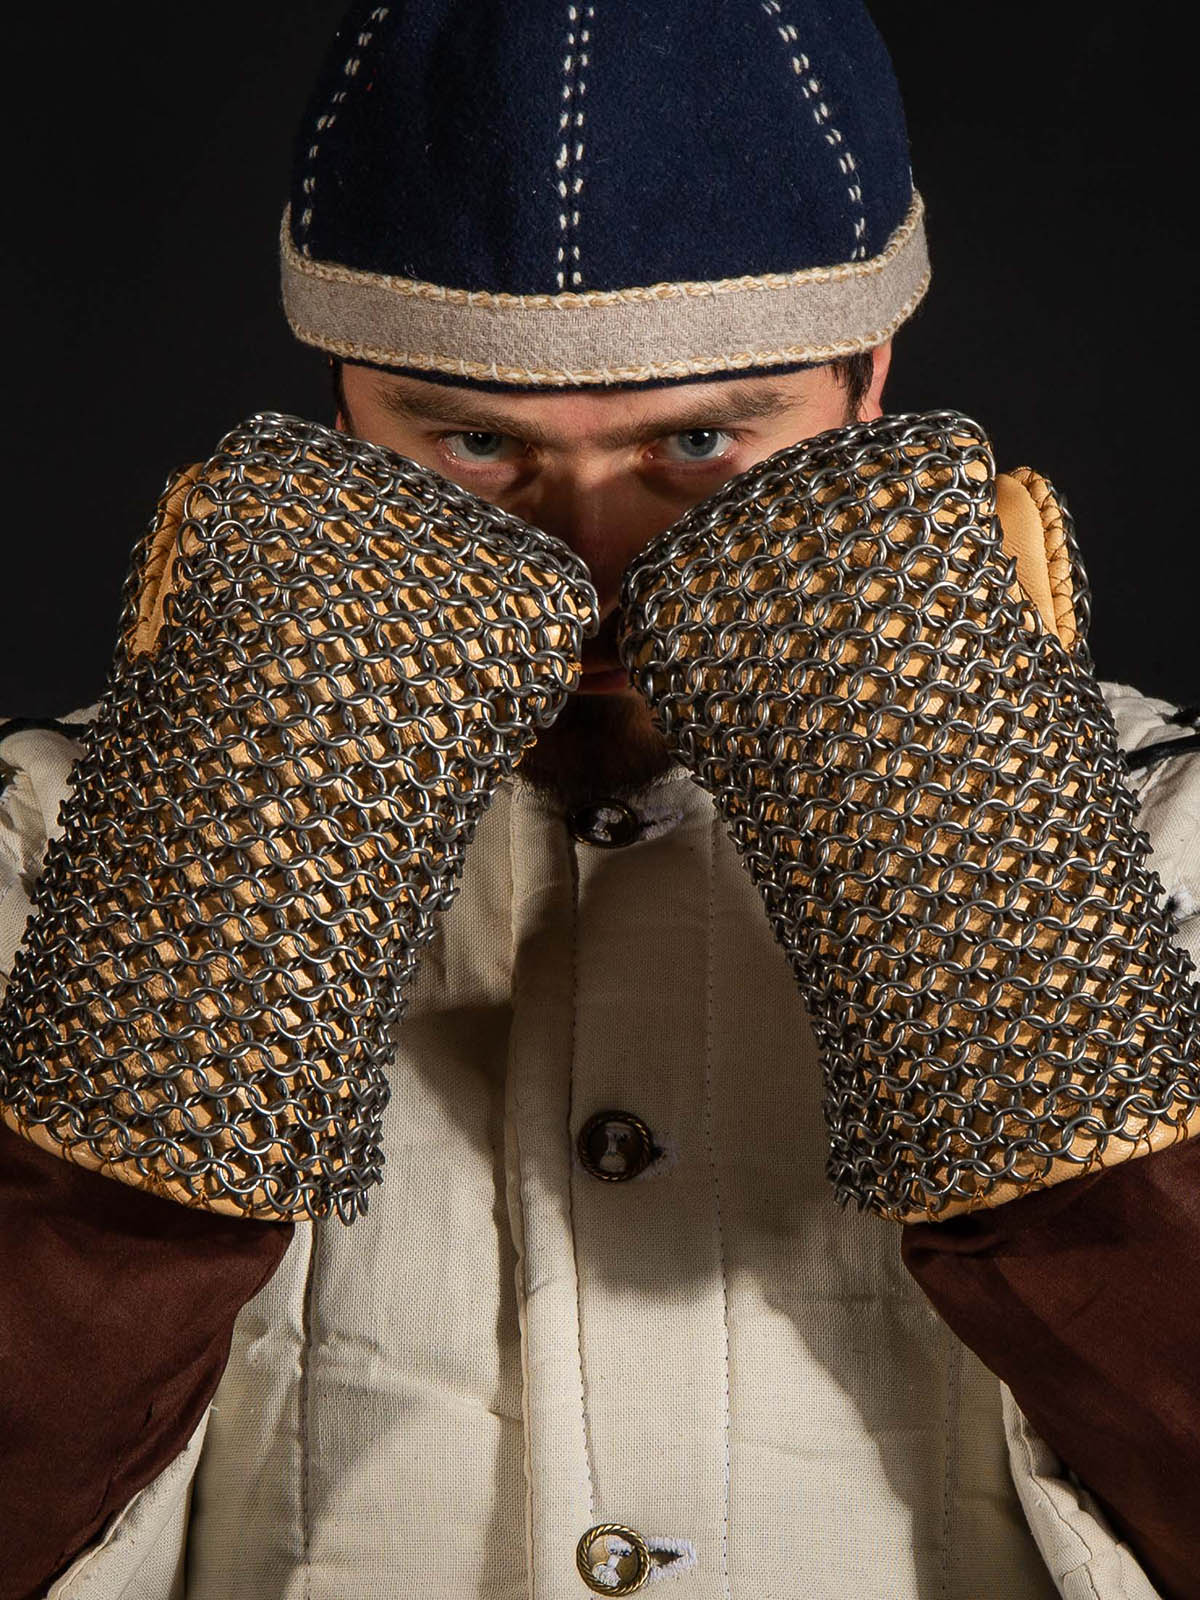 https://steel-mastery.com/image/catalog/PhotosForSharingLinks/medieval-chinmail-gloves-by-steel-mastery.jpg